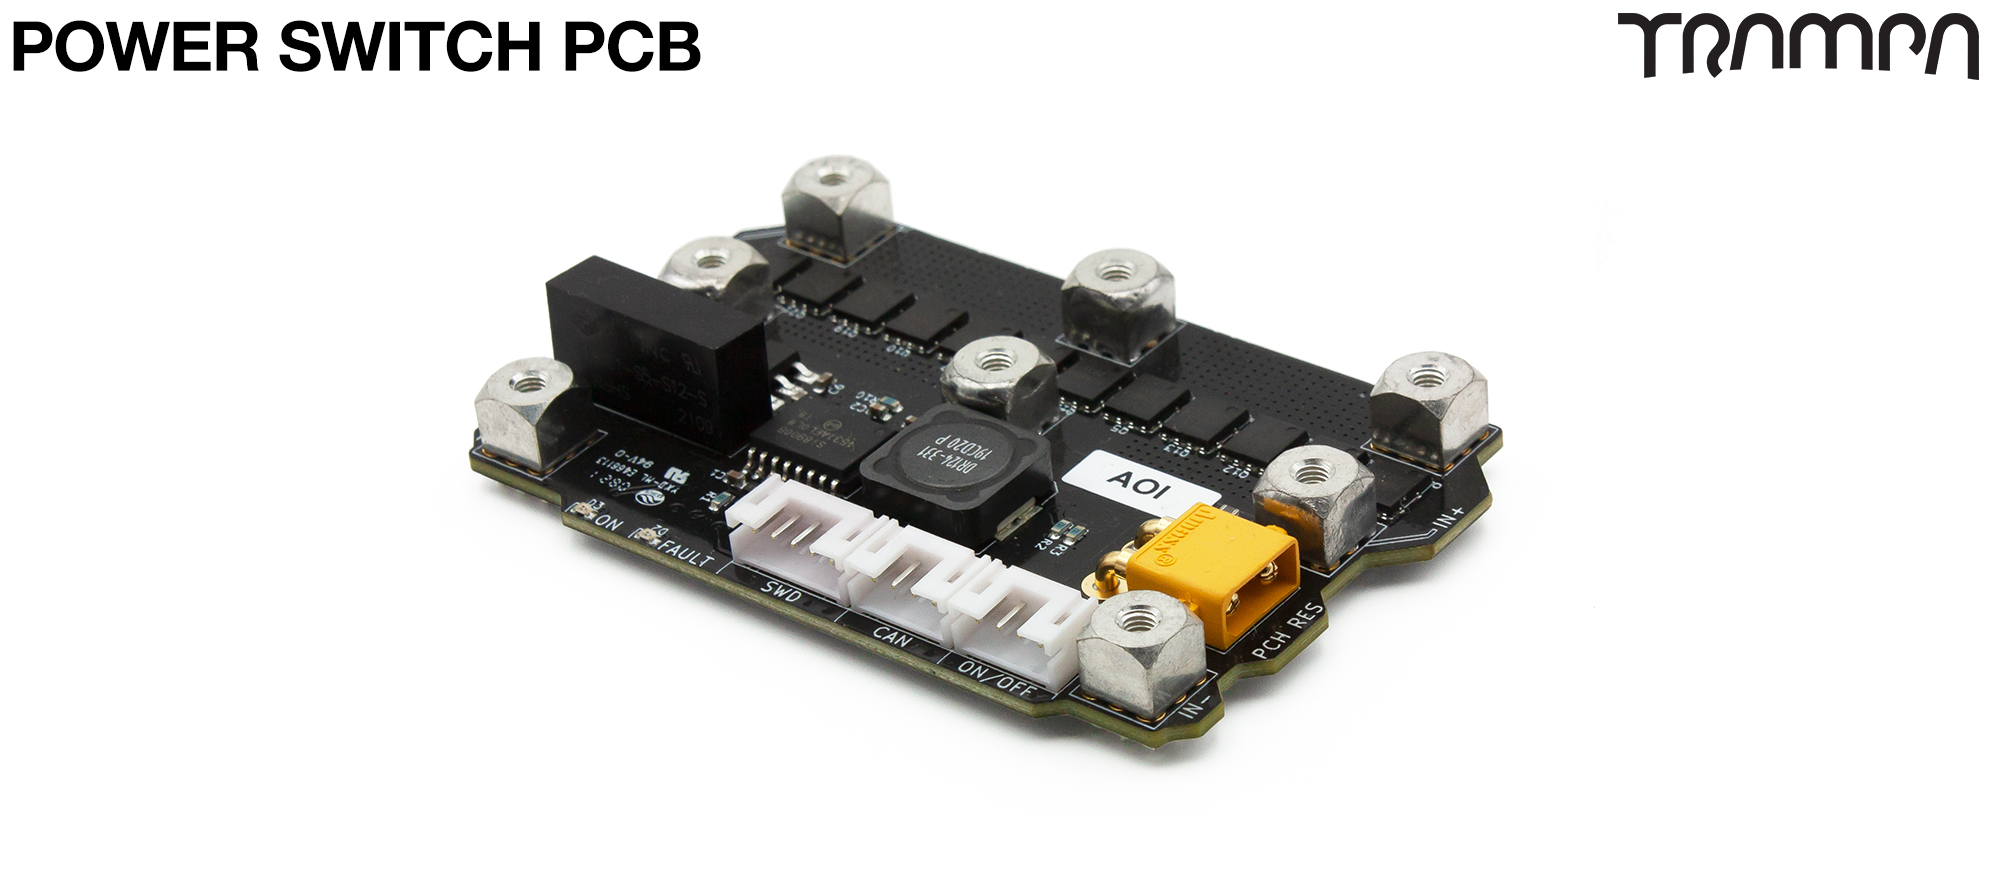 POWER SWITCH PCB